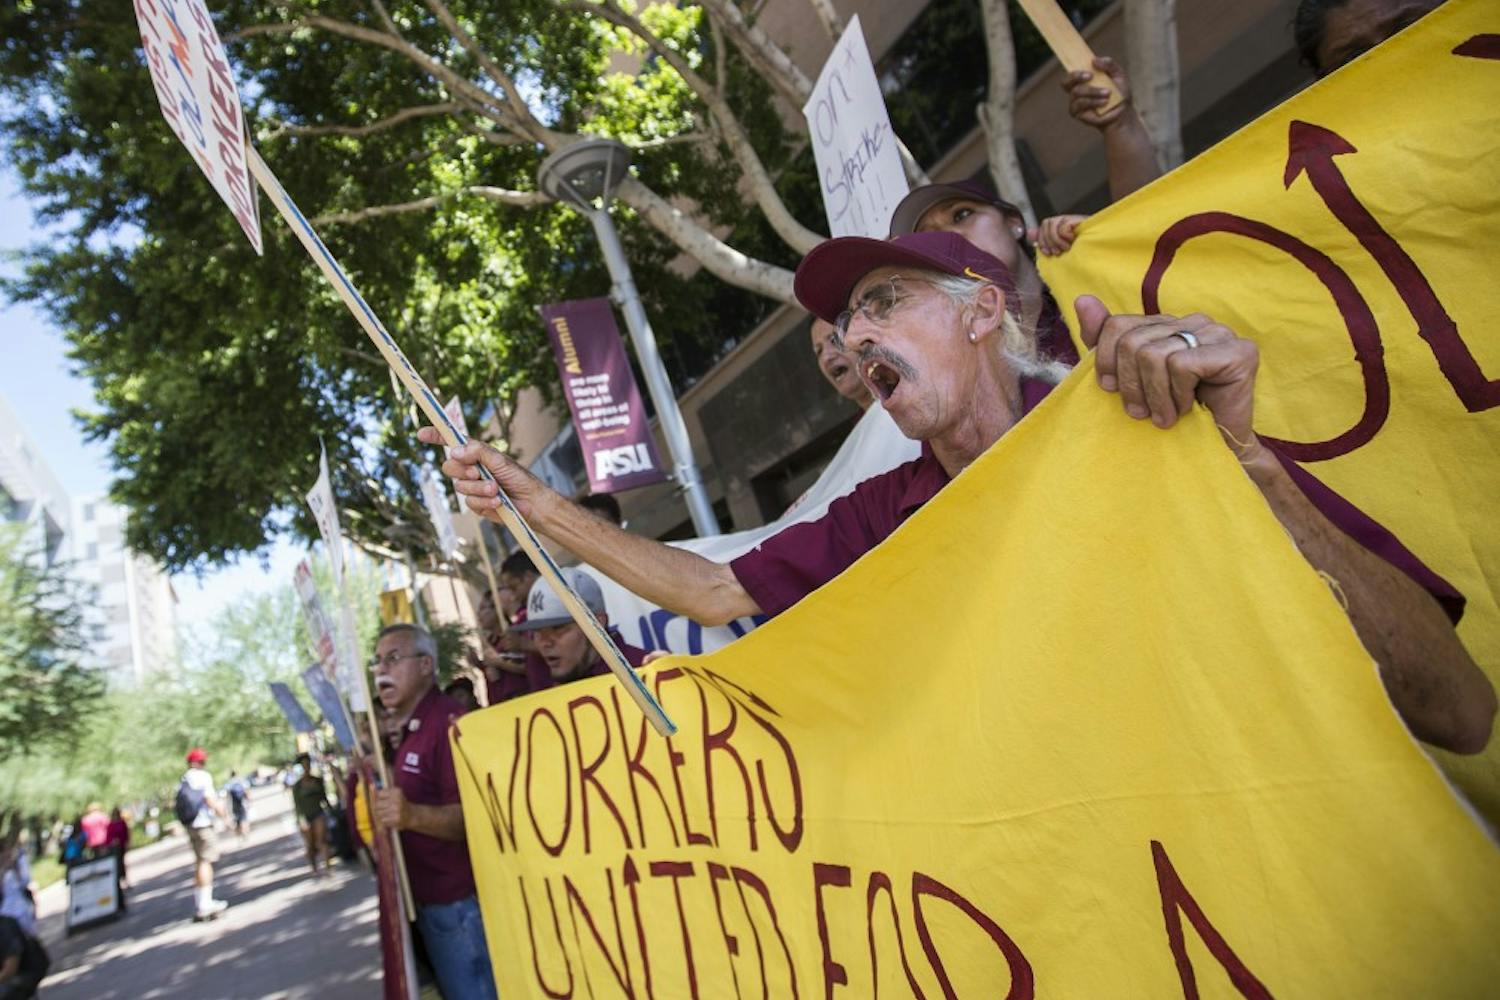 Olympus employees protest in Taylor Mall on the Downtown Phoenix campus on Thursday, Sept. 1, 2016. The employees were protesting unfair working conditions at Olympus, a company ASU contracts for janitorial services in buildings across campus. 